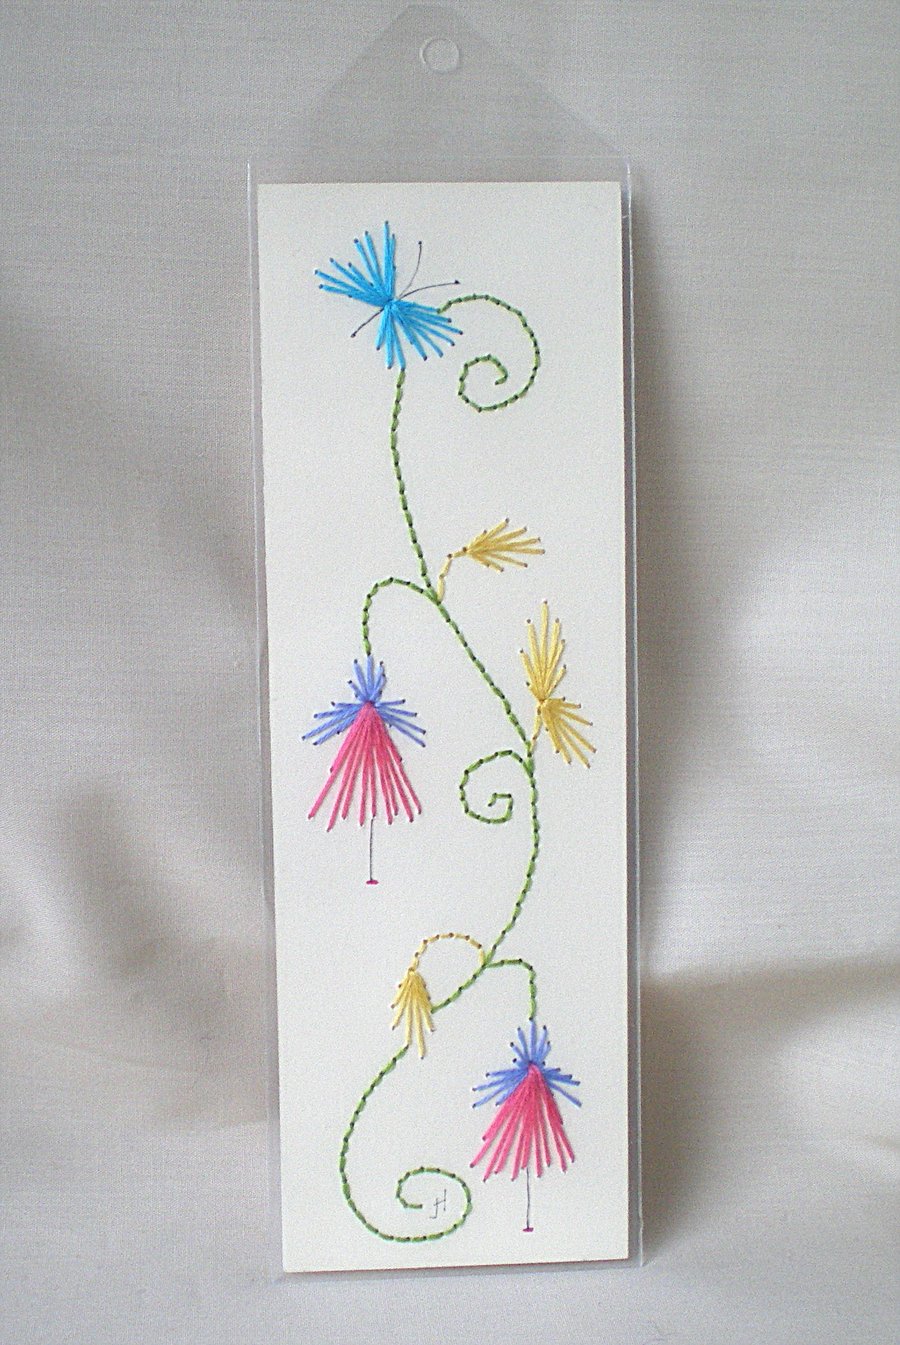 Book mark,Embroidered book mark,Embroidery,Book worms,